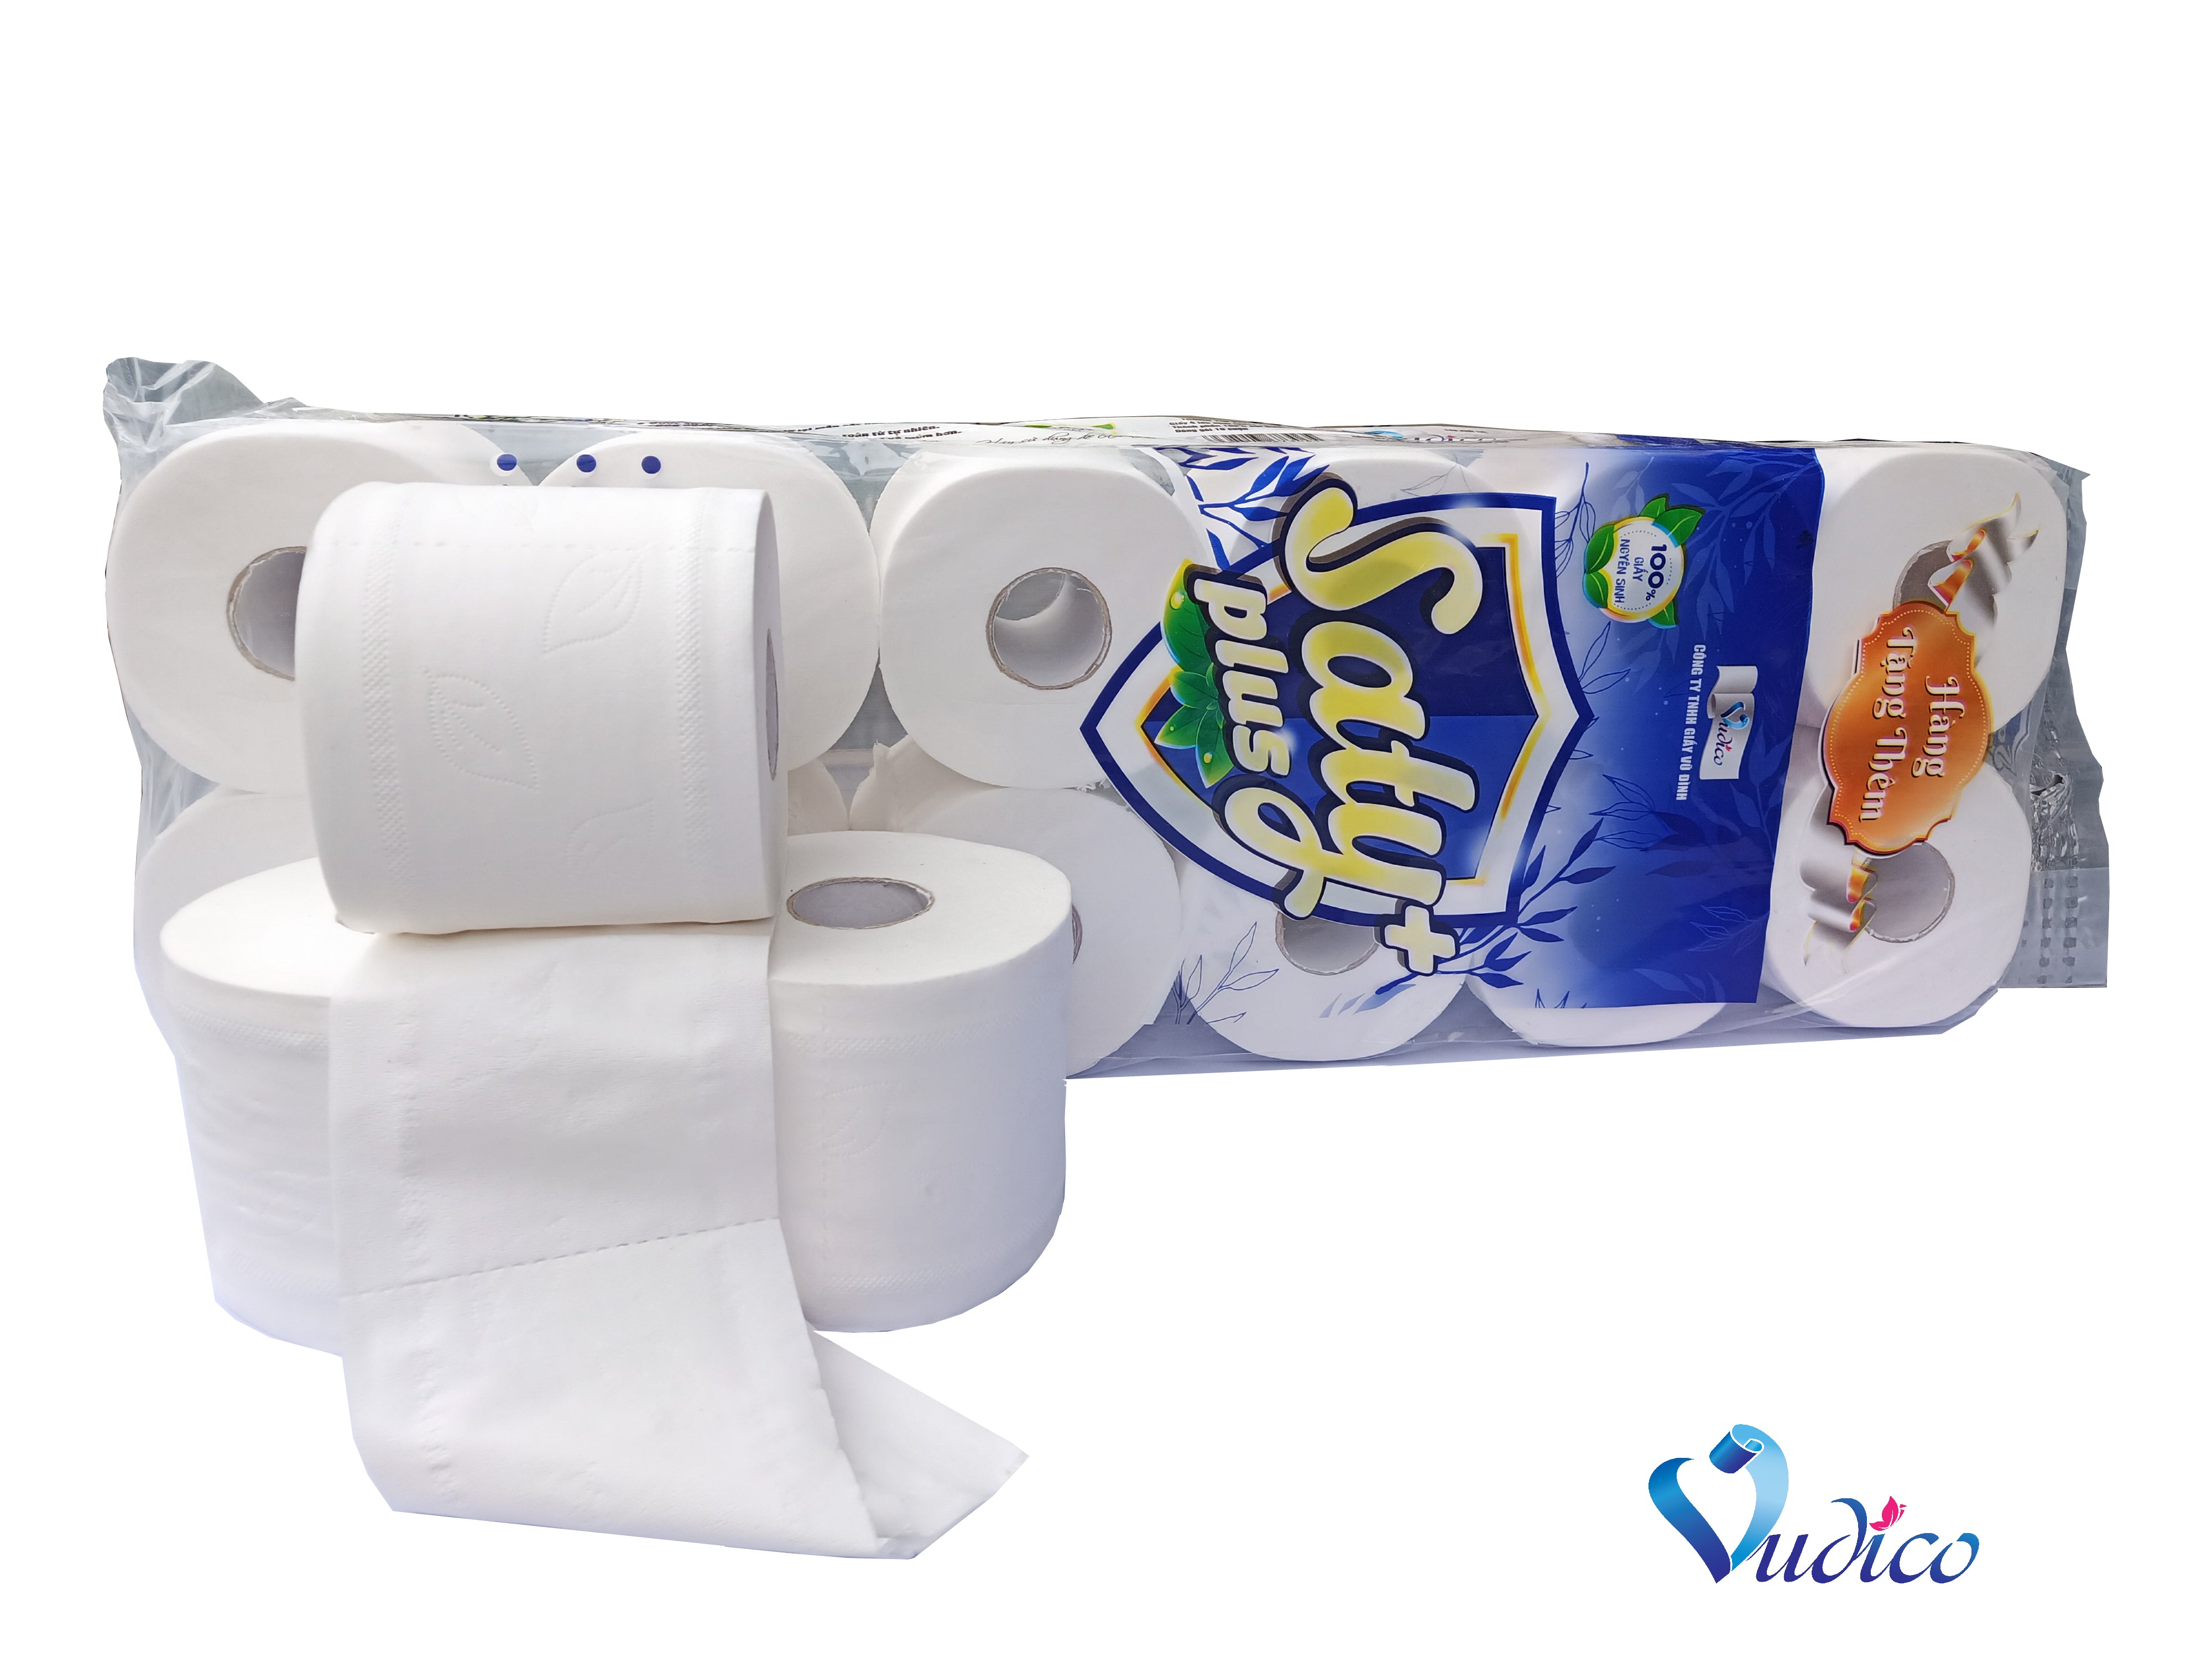 Saty 2-Ply Toilet Paper, 24 Rolls (2 Packs of 12), White 2-ply·24 Rolls